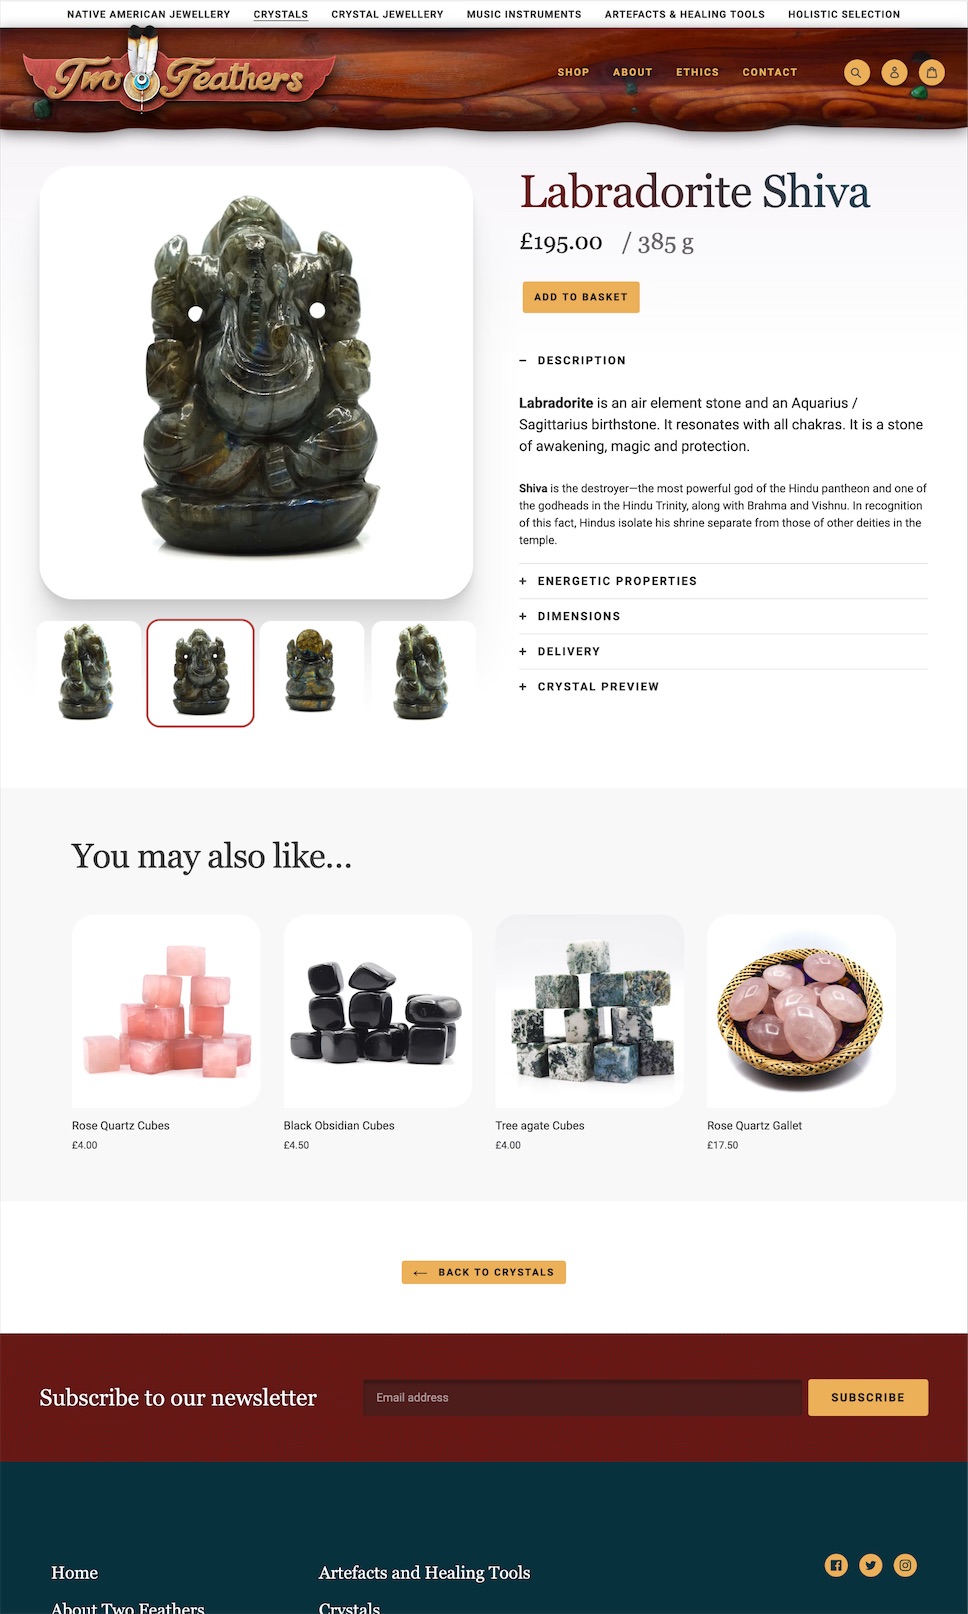 Product page showing crystals